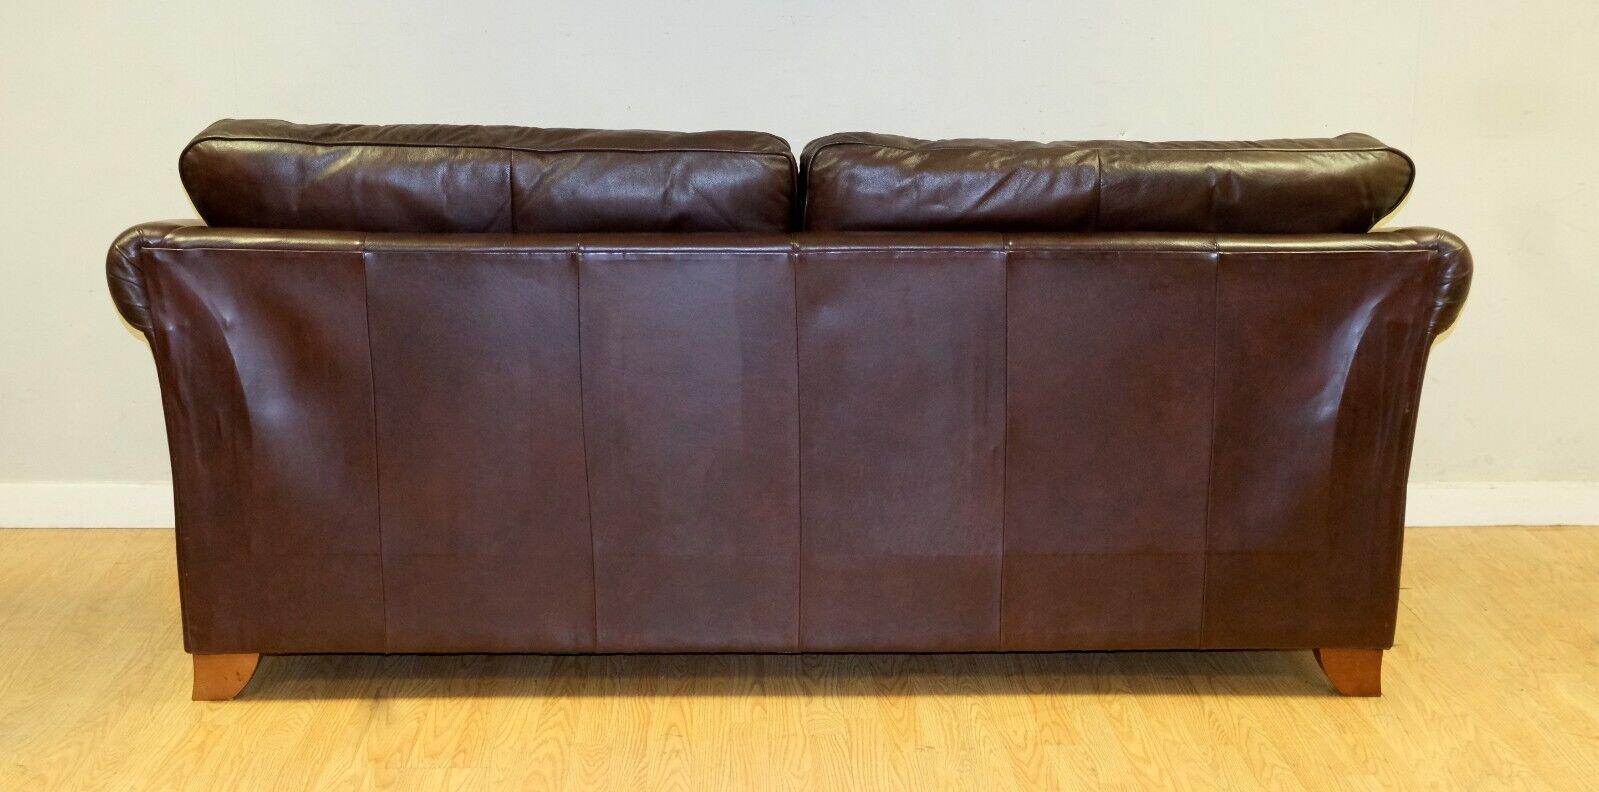 Hand-Crafted LOVELY MARKS & SPENCER ABBEY BRoWN LEATHER TWO SEATER SOFA ON WOODEN FEET For Sale